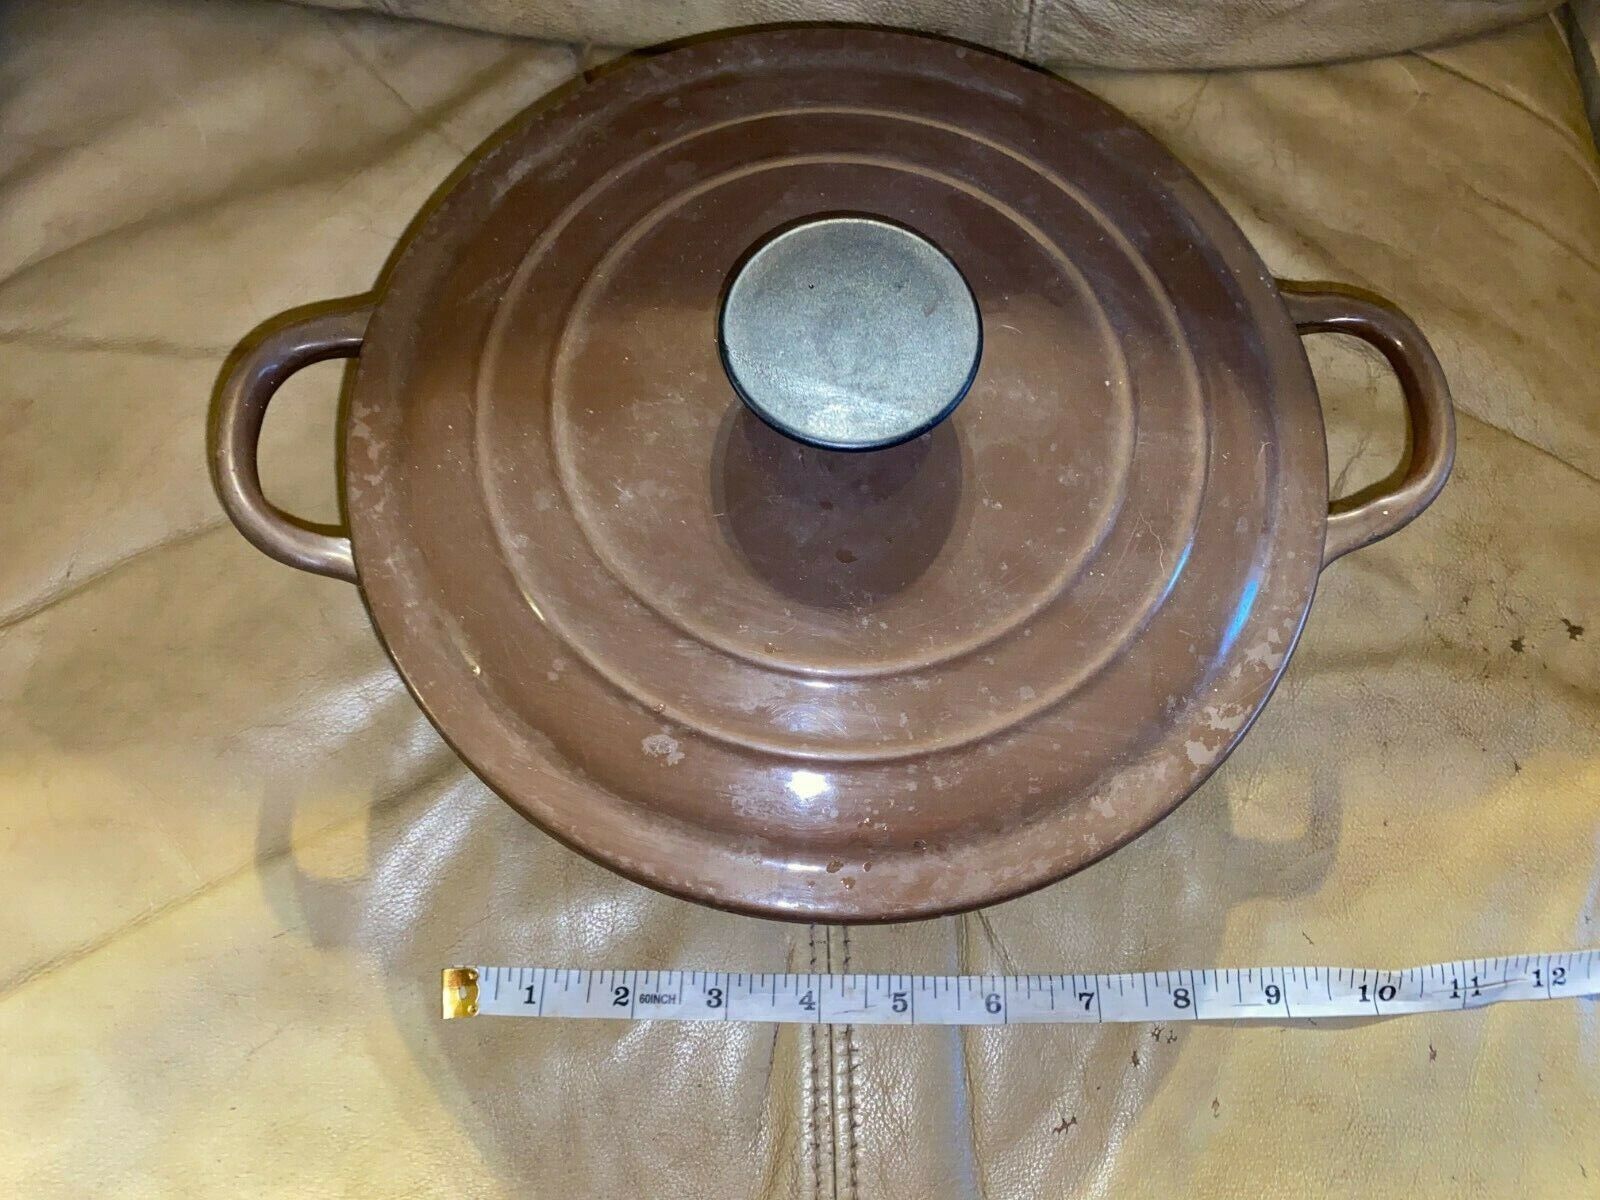 Chocolate Brown Le Creuset 'D' Cast Iron Dutch Oven with Lid. Made in France